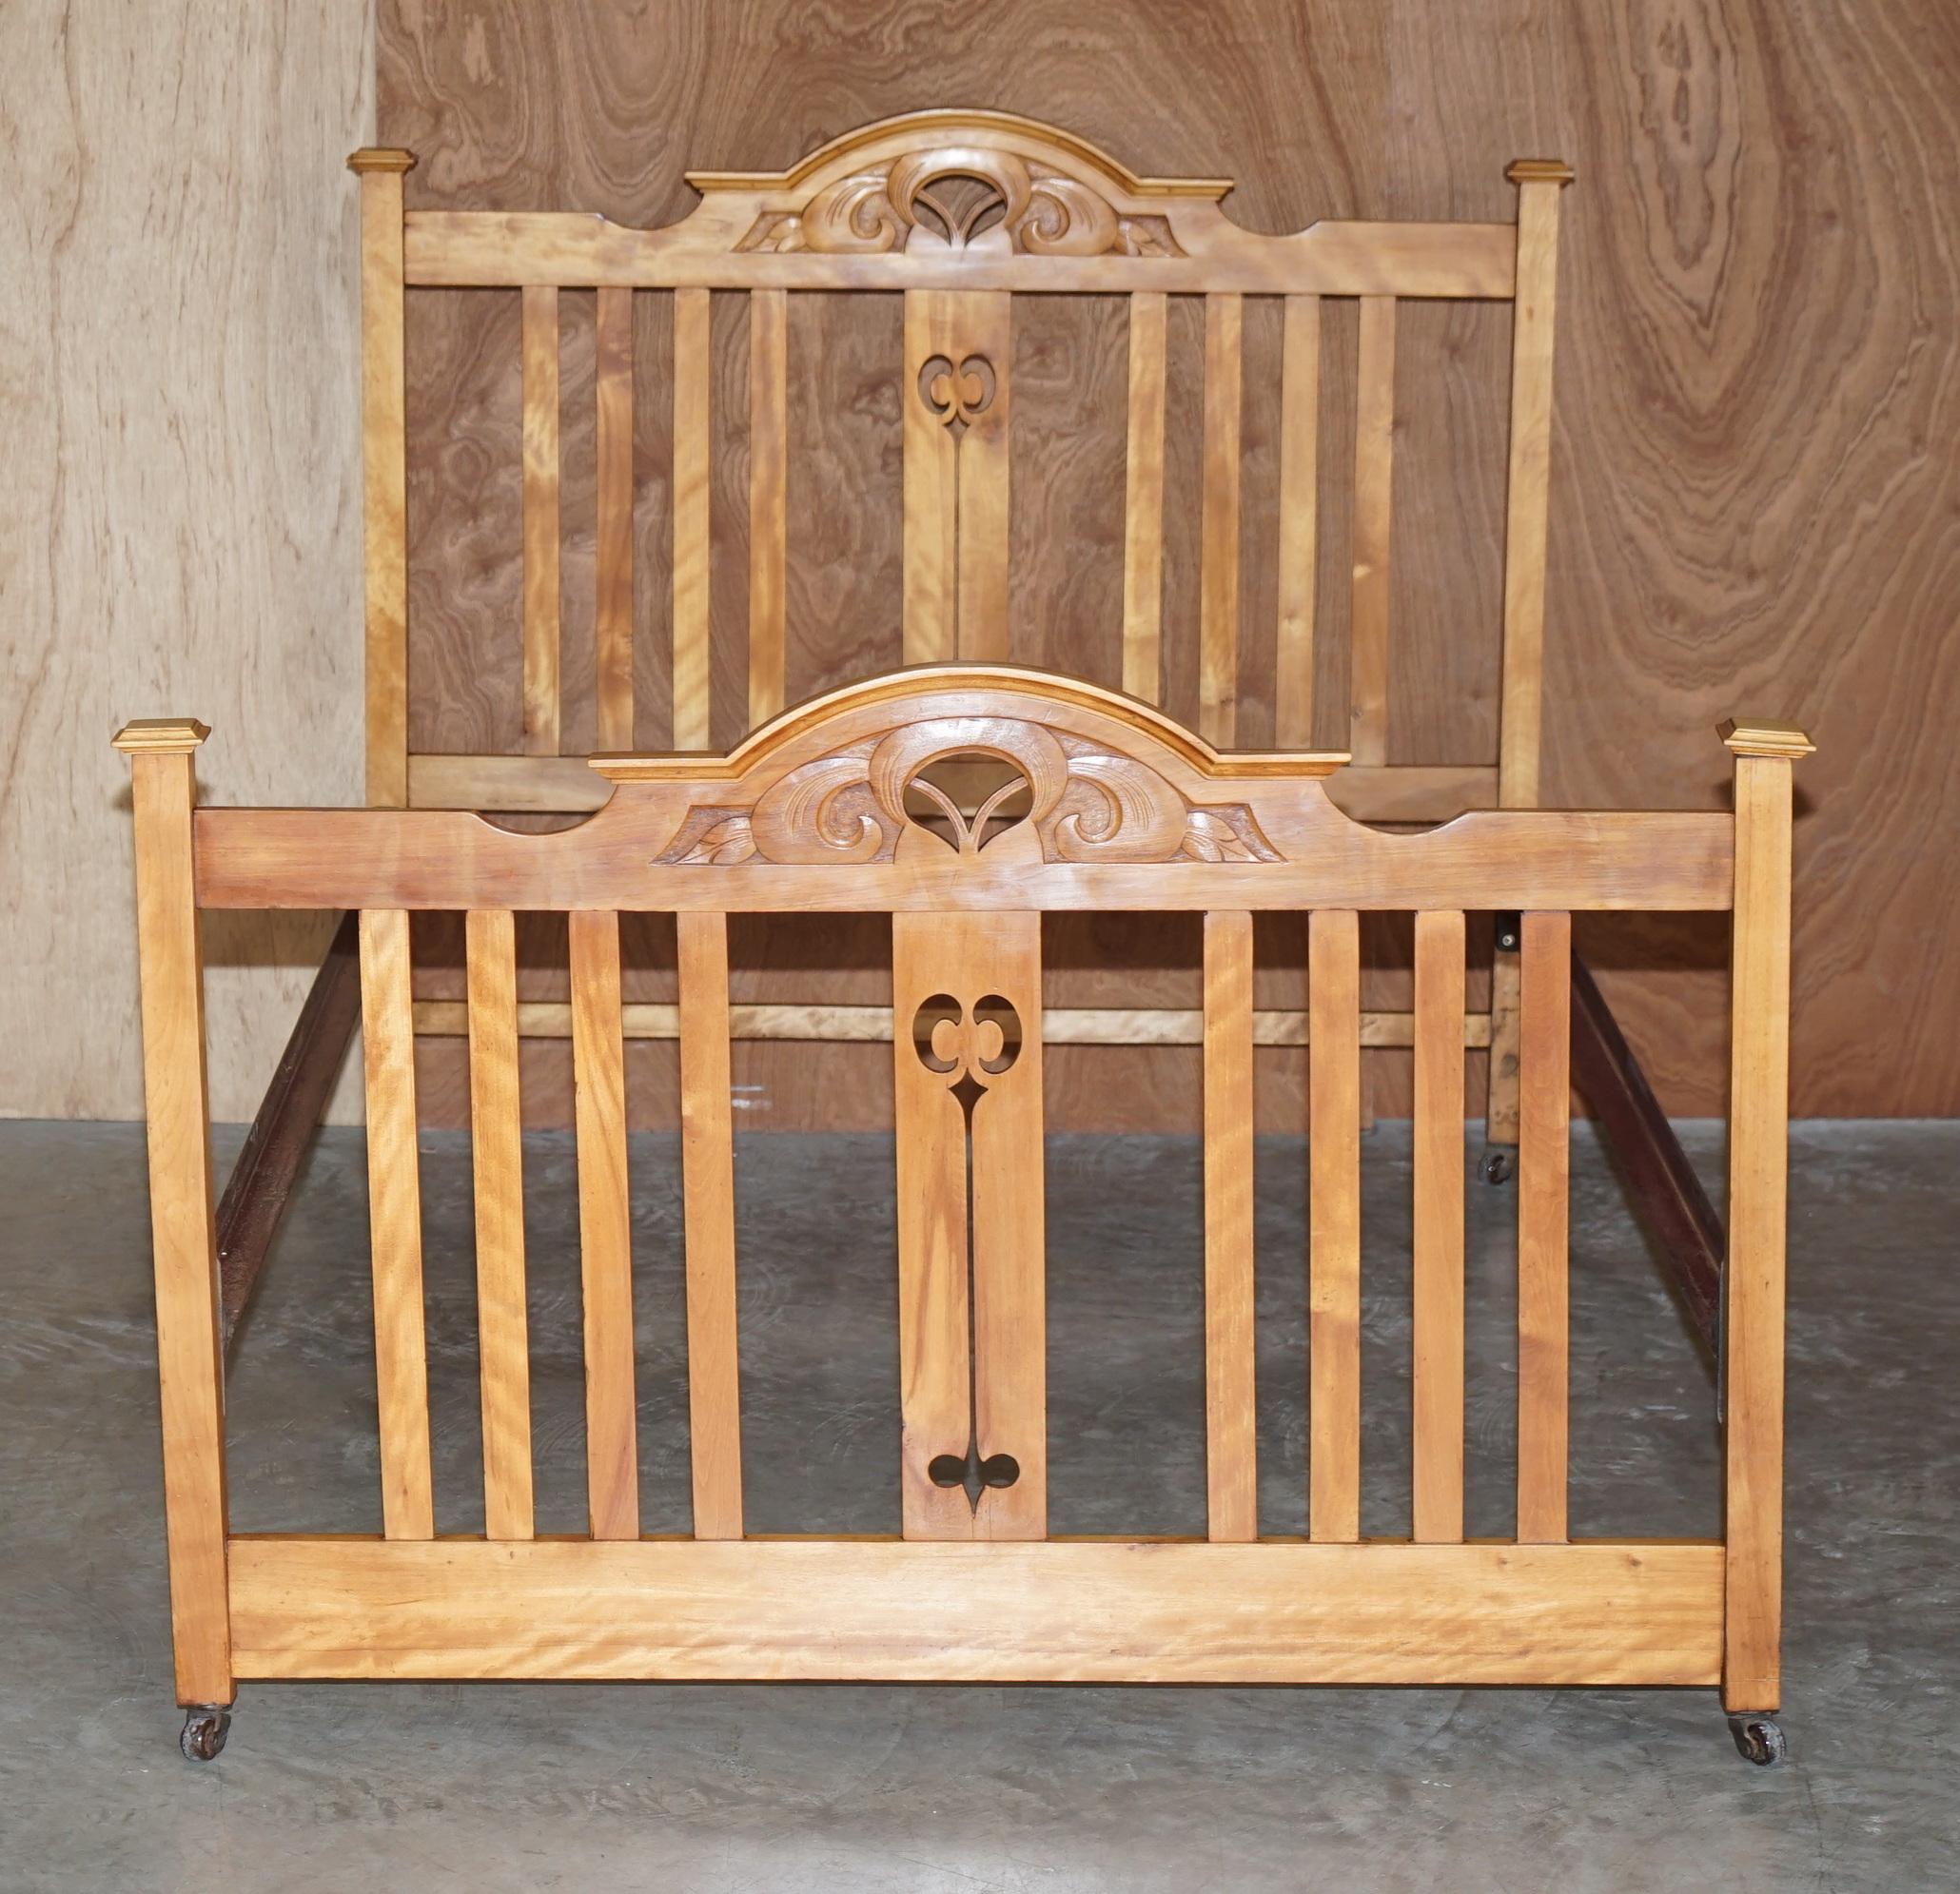 We are delighted to offer for sale this sublime Liberty’s London Art Nouveau bed frame with original oversized porcelain castors

A very good looking and well made bed frame, designed by Liberty’s London in the Arcibold Knox taste, its all